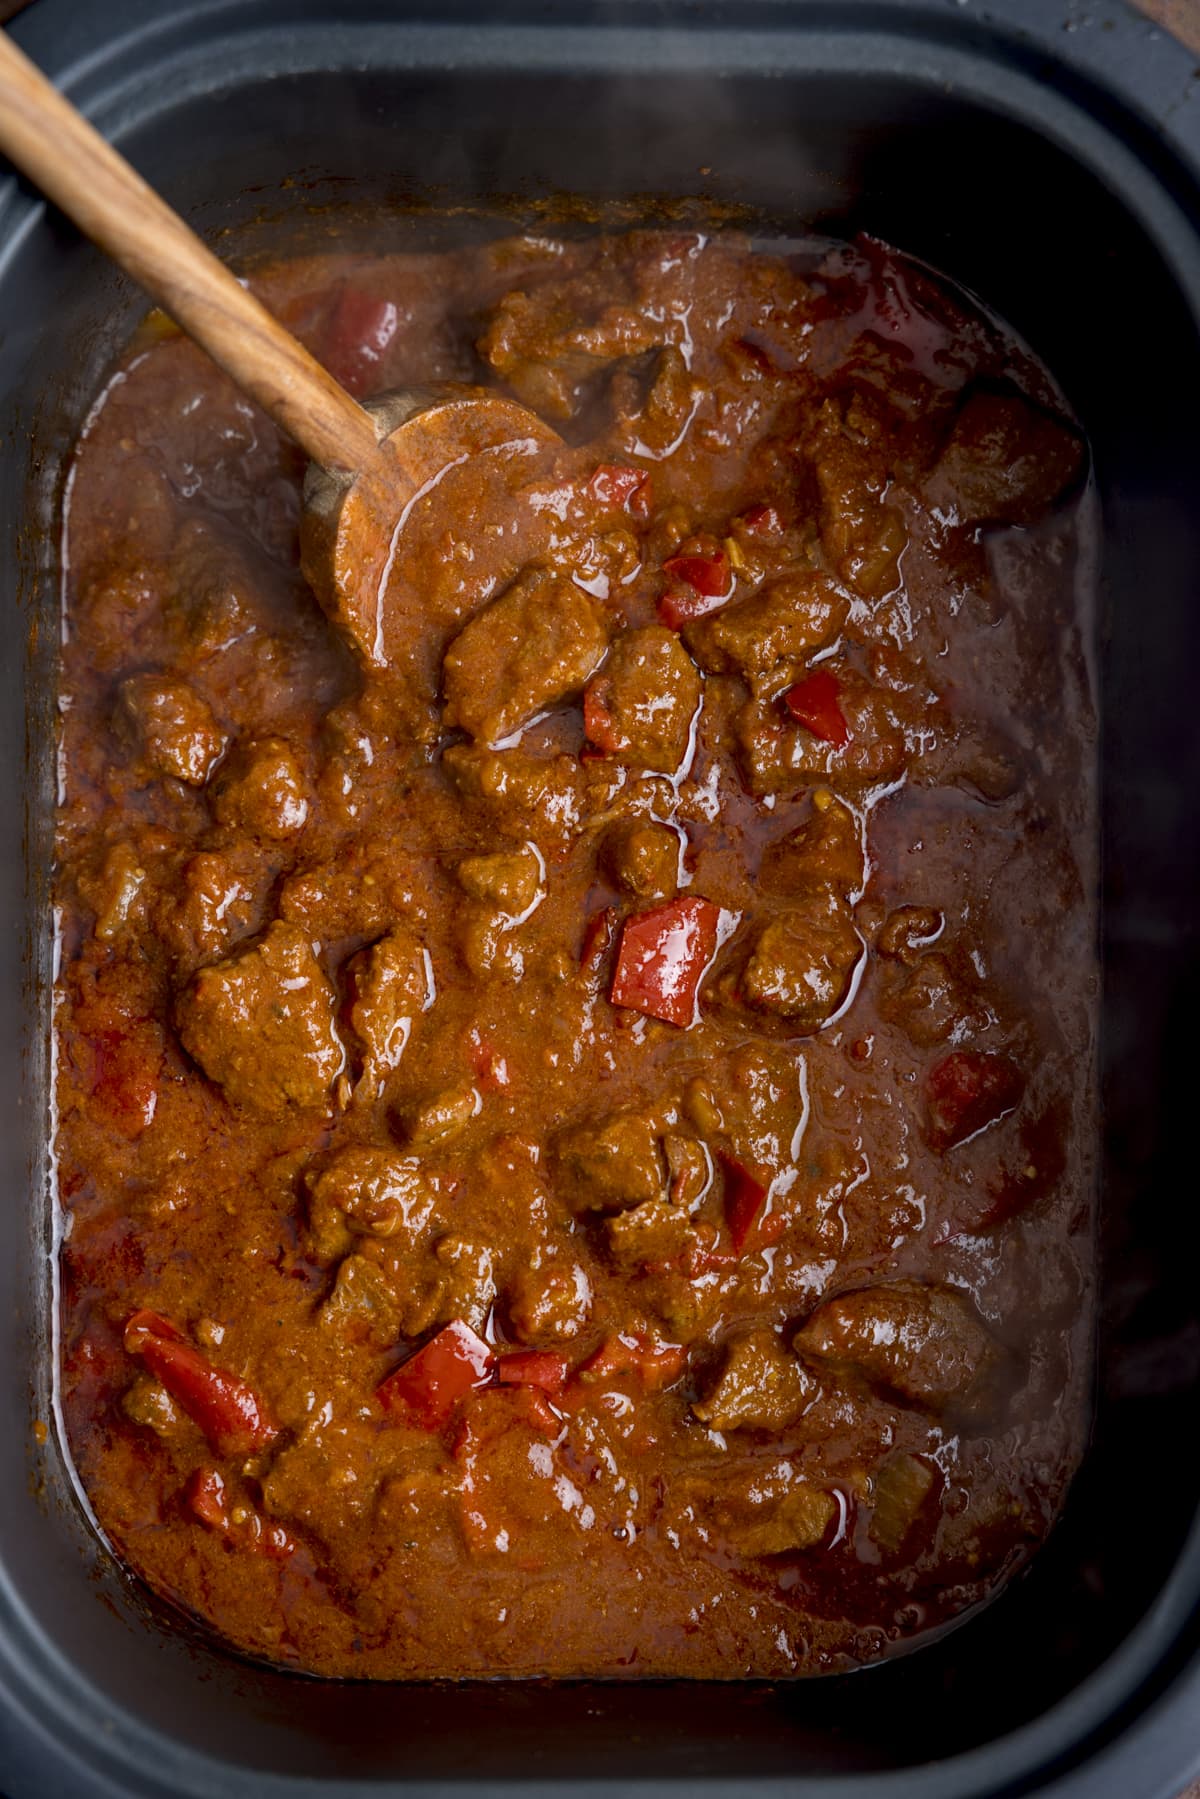 Overhead image of beef curry with red peppers in a slow cooker. There is a wooden spoon in the curry.